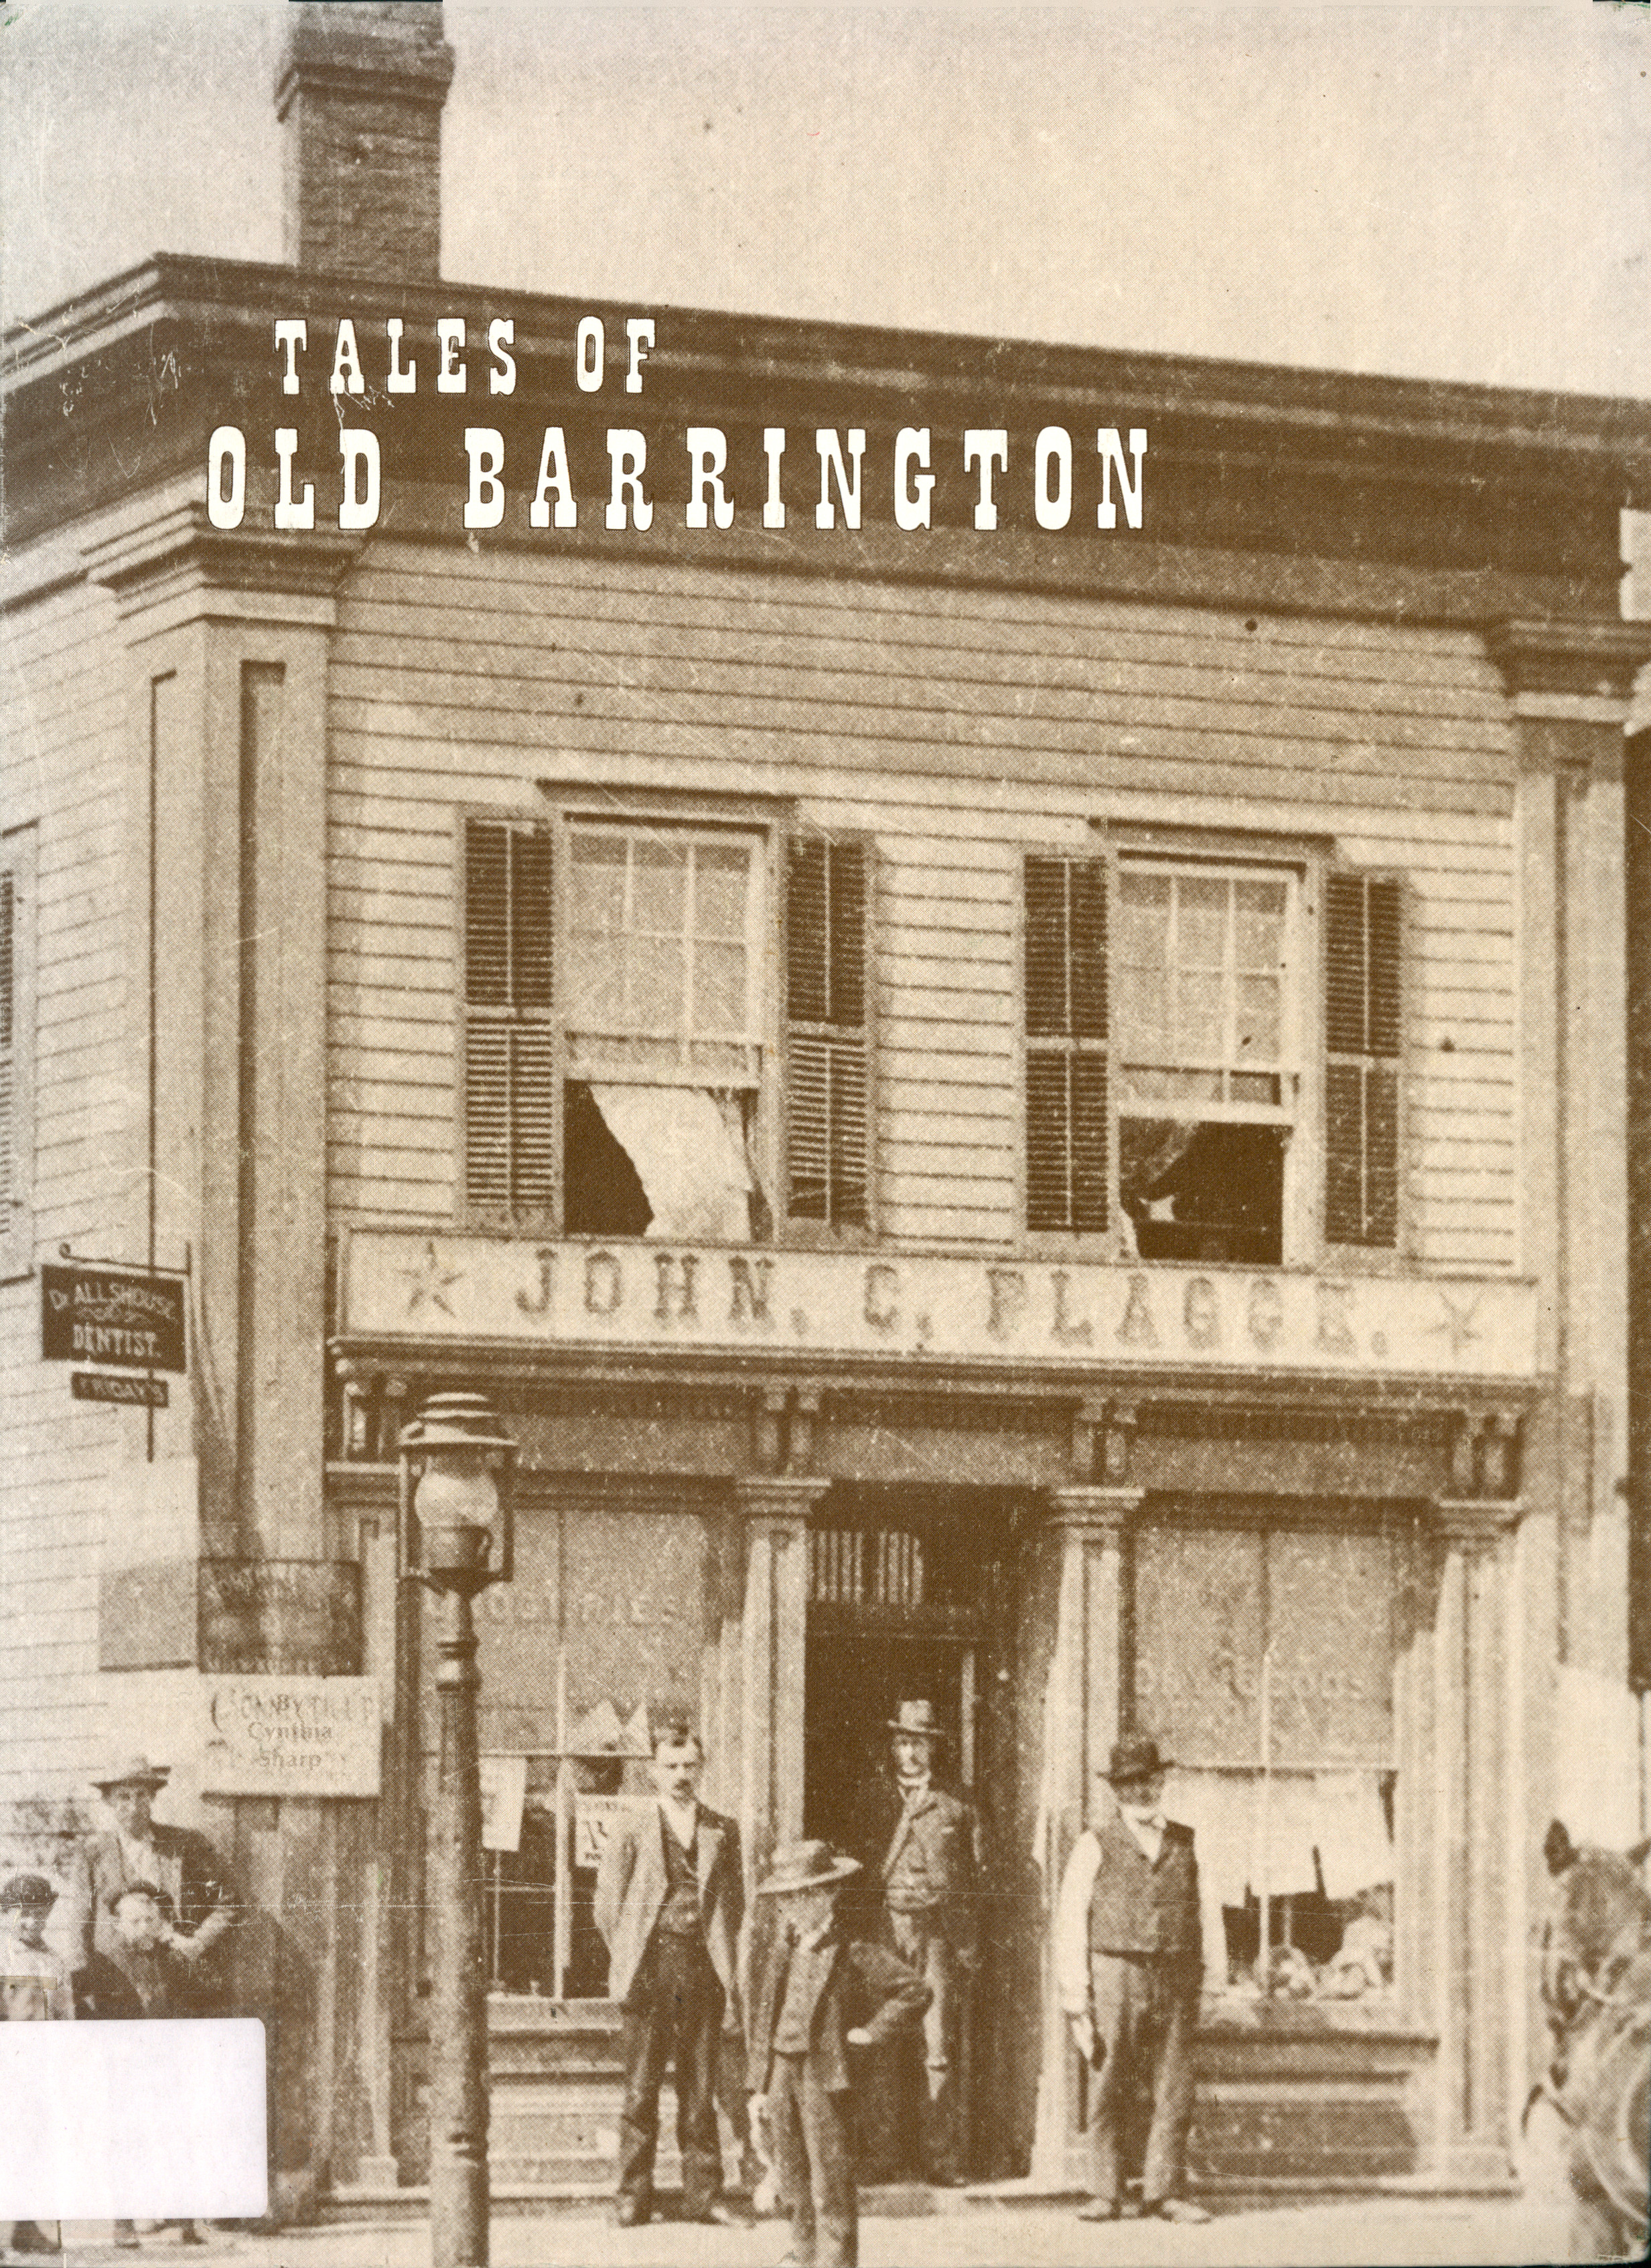 Image for "Tales of old Barrington"